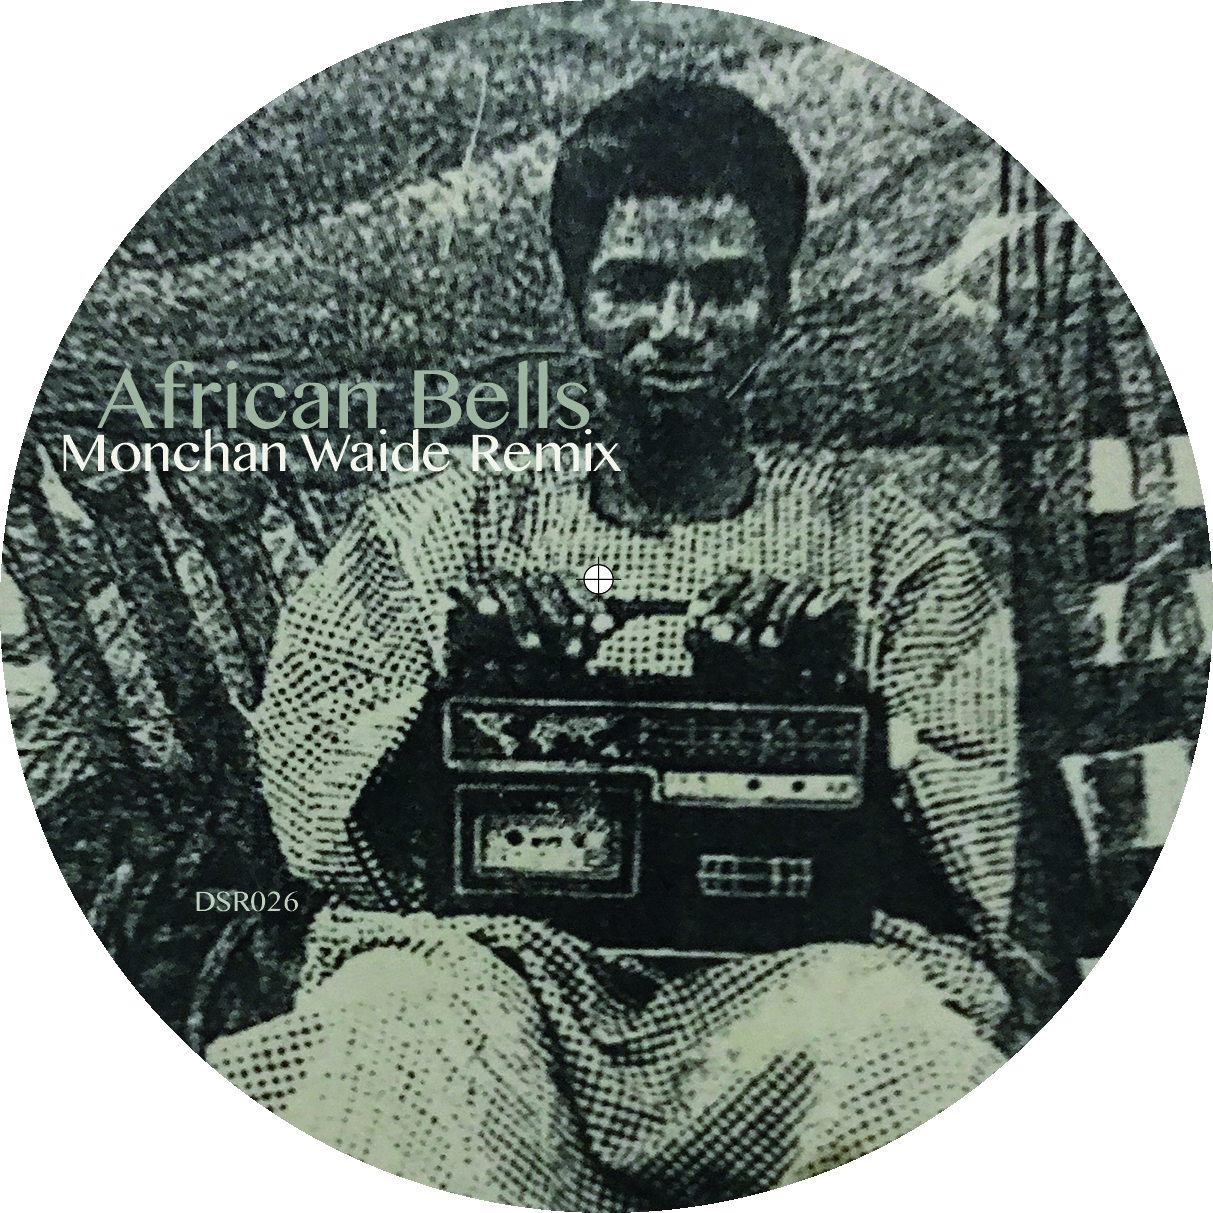 Blackulture Productions/AFRICAN... 12"